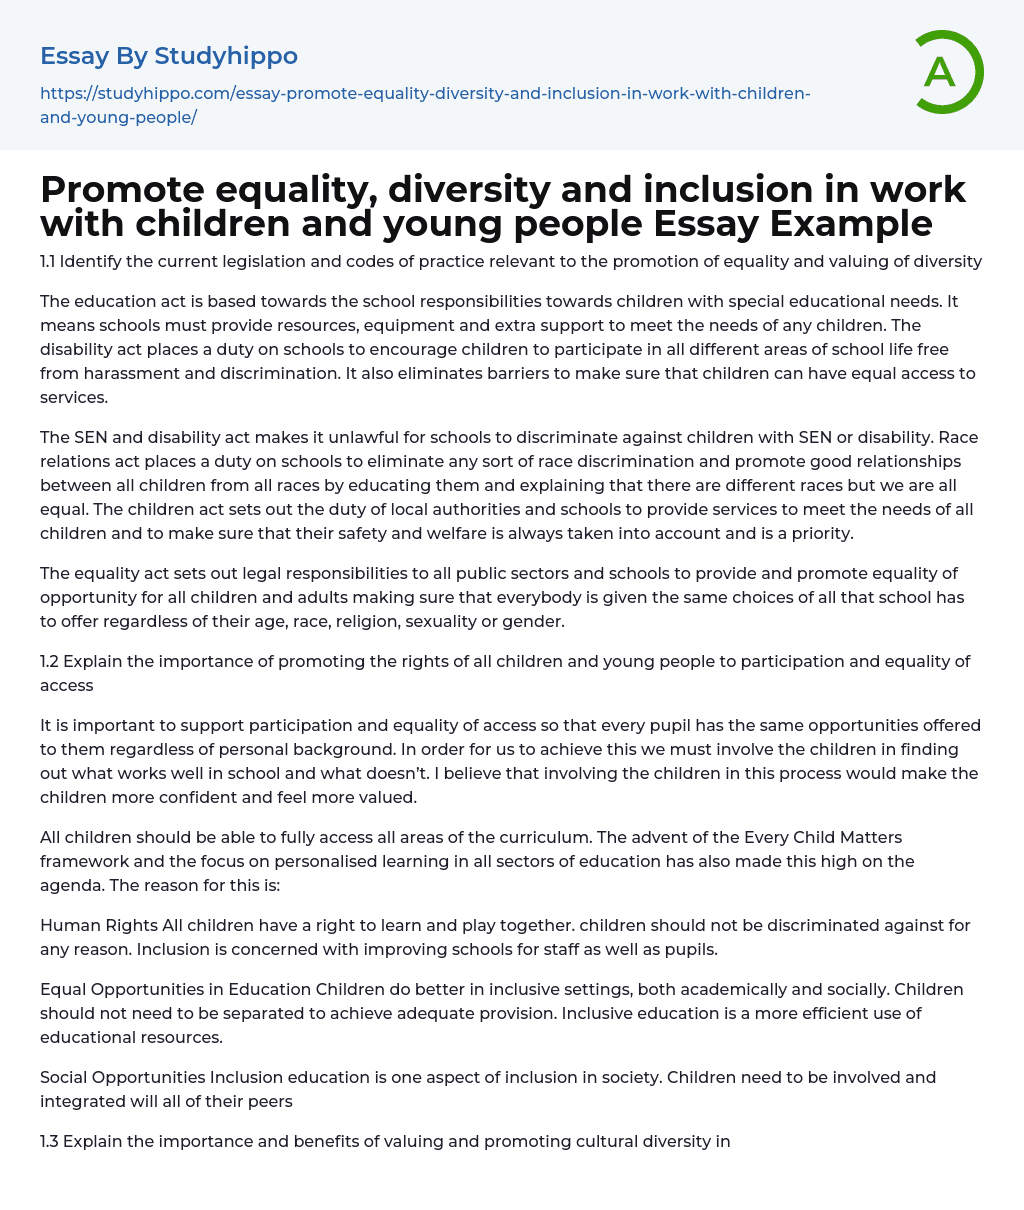 Promote equality, diversity and inclusion in work with children and young people Essay Example